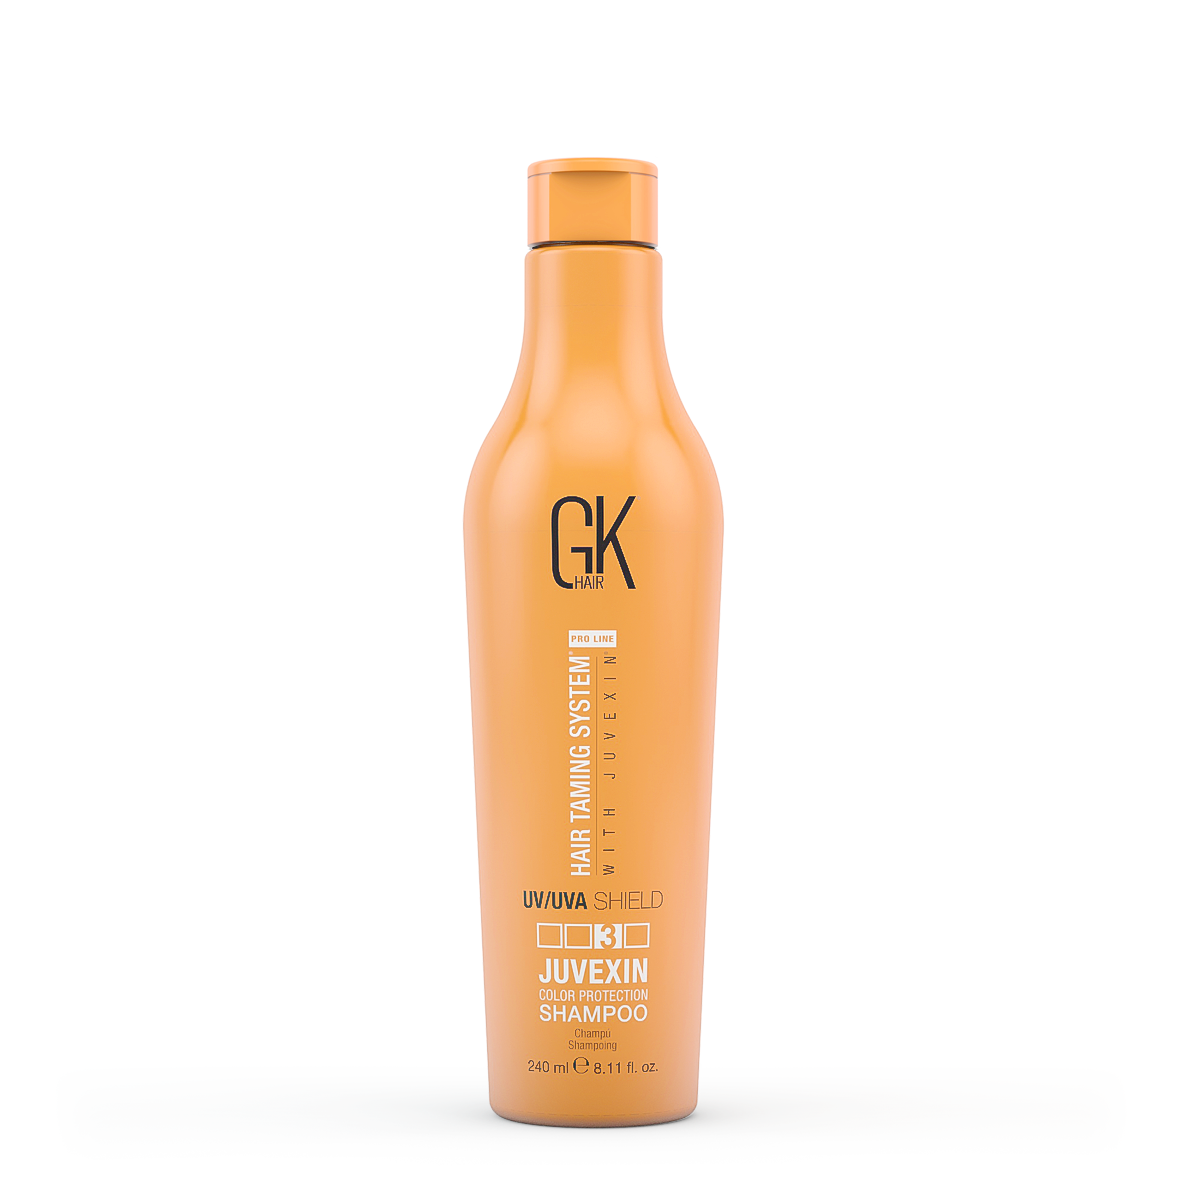 Shield Shampoo and Conditioner are available at GK Hair